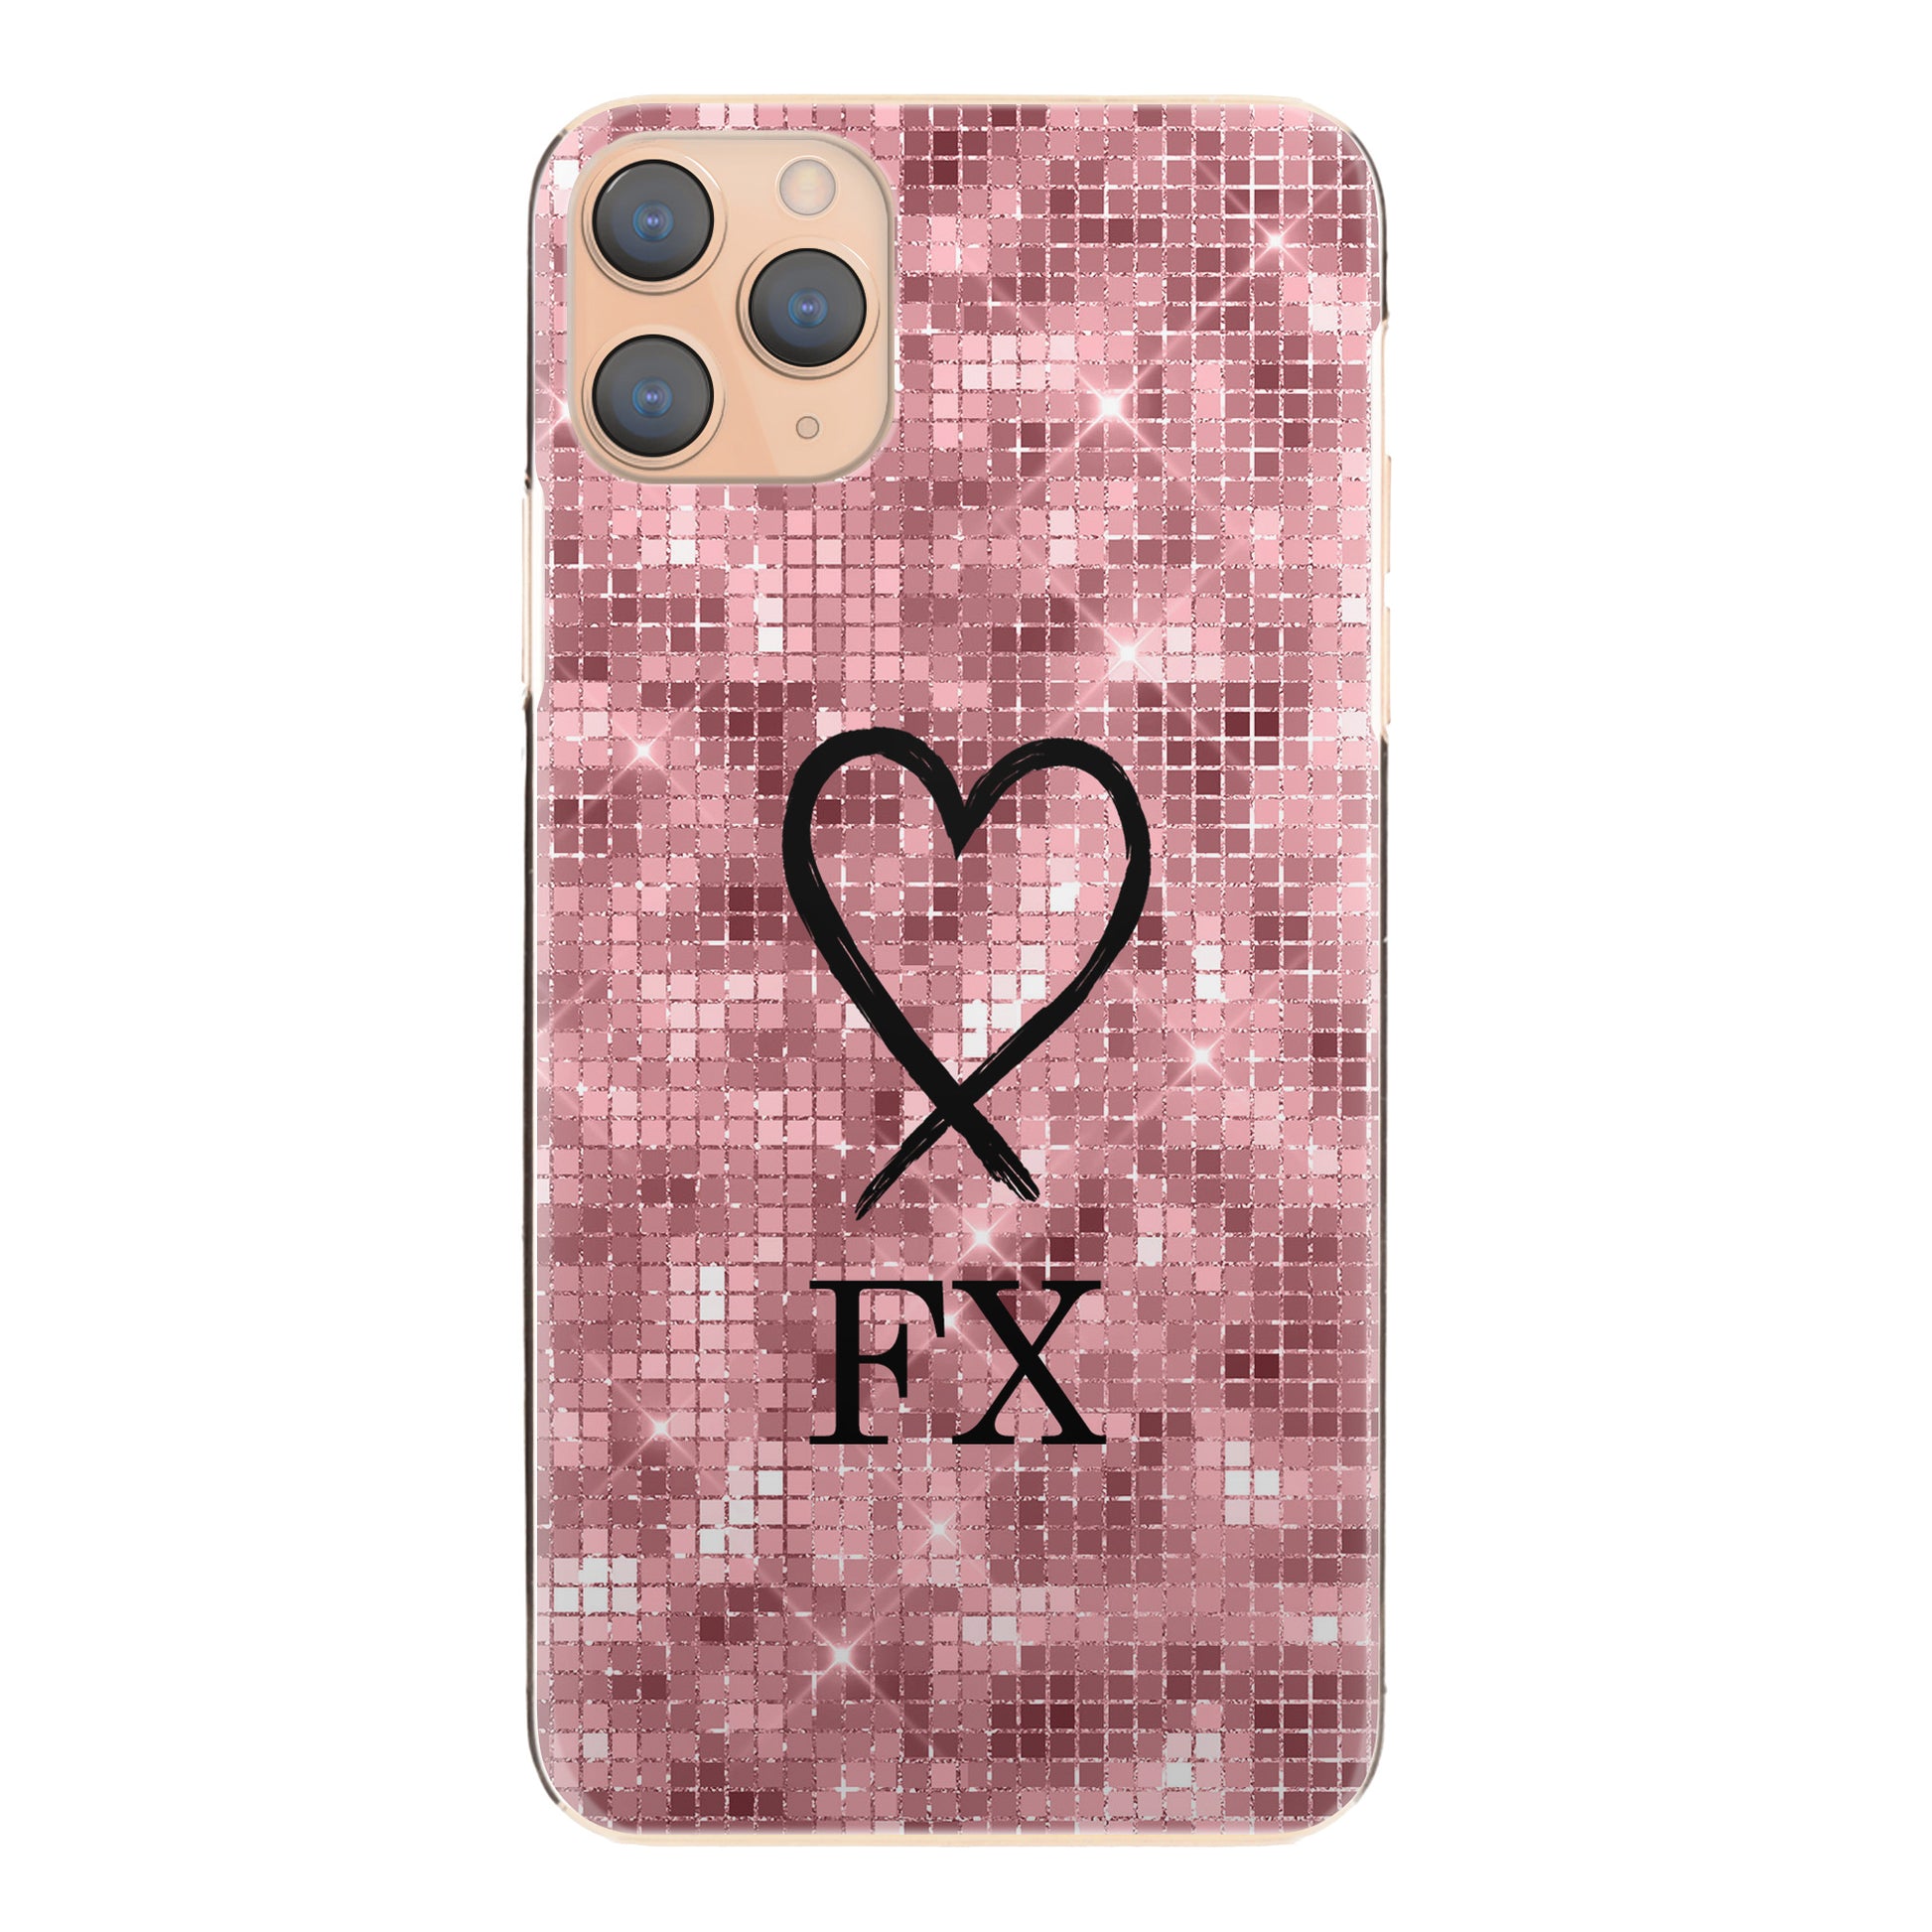 Personalised Oppo Phone Hard Case with Heart Sketch and Initials on Pink Disco Ball